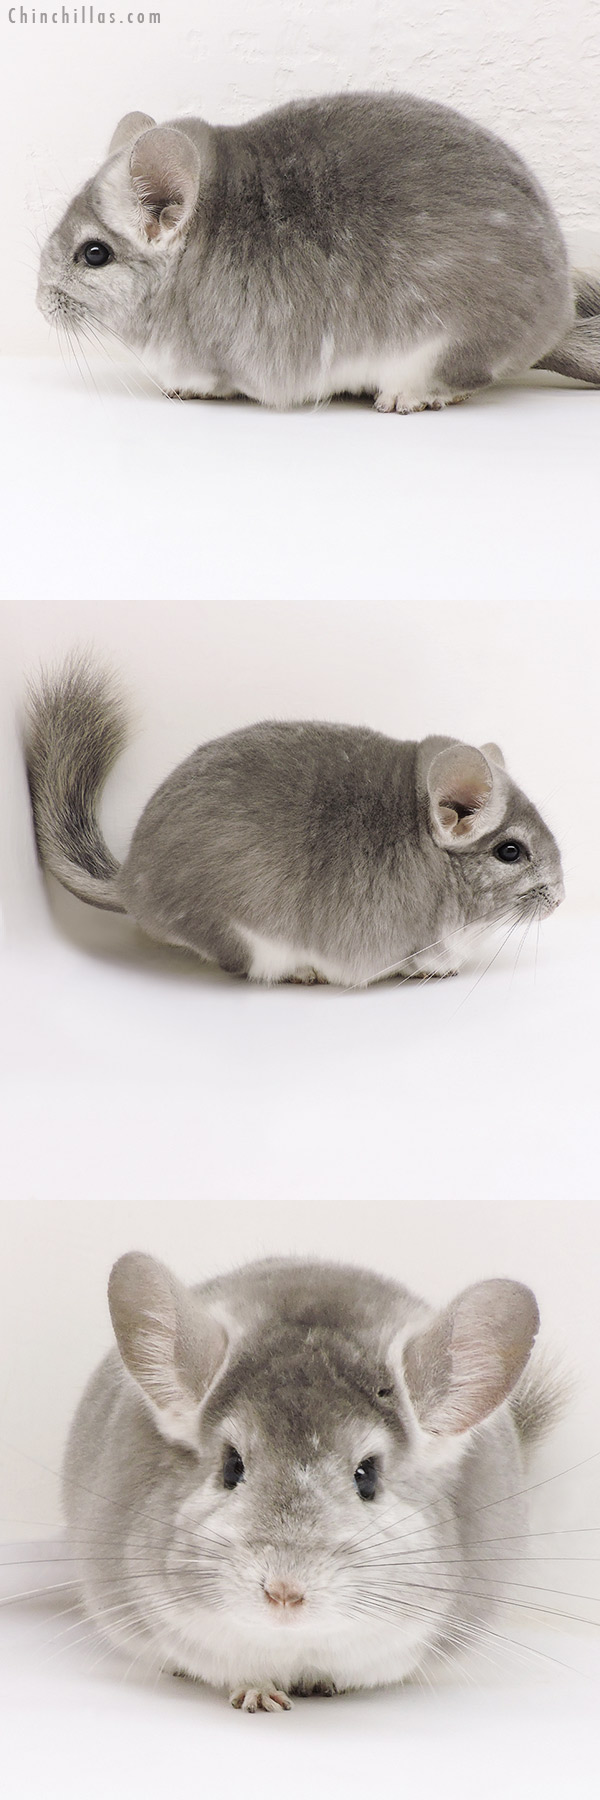 Chinchilla or related item offered for sale or export on Chinchillas.com - 17175 Large Blocky Show Quality Fading Violet Female Chinchilla